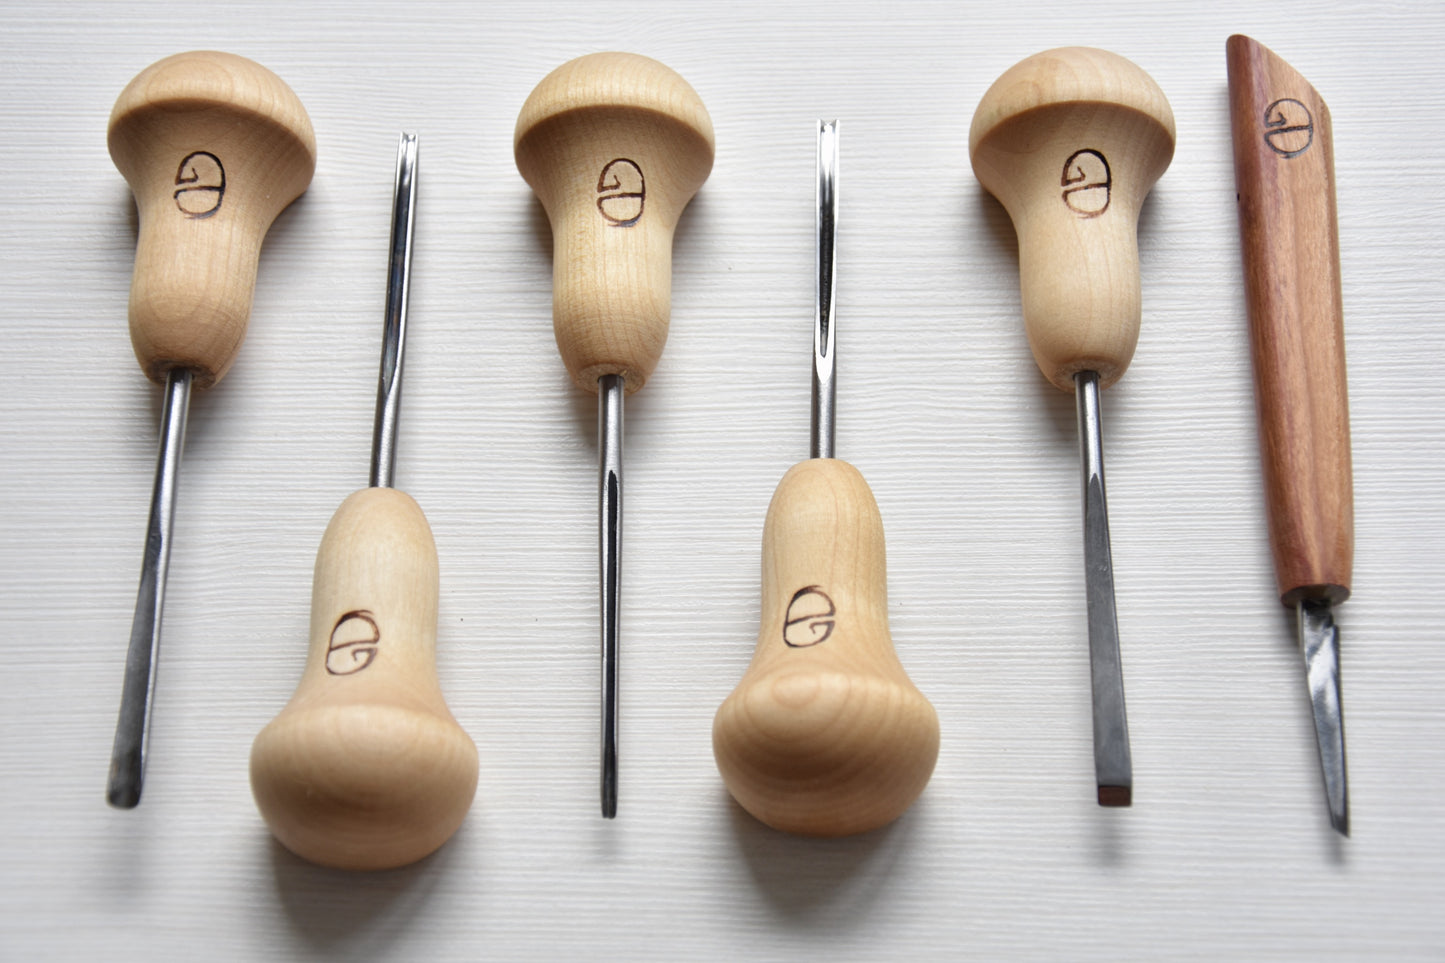 6 piece wood carving palm tools